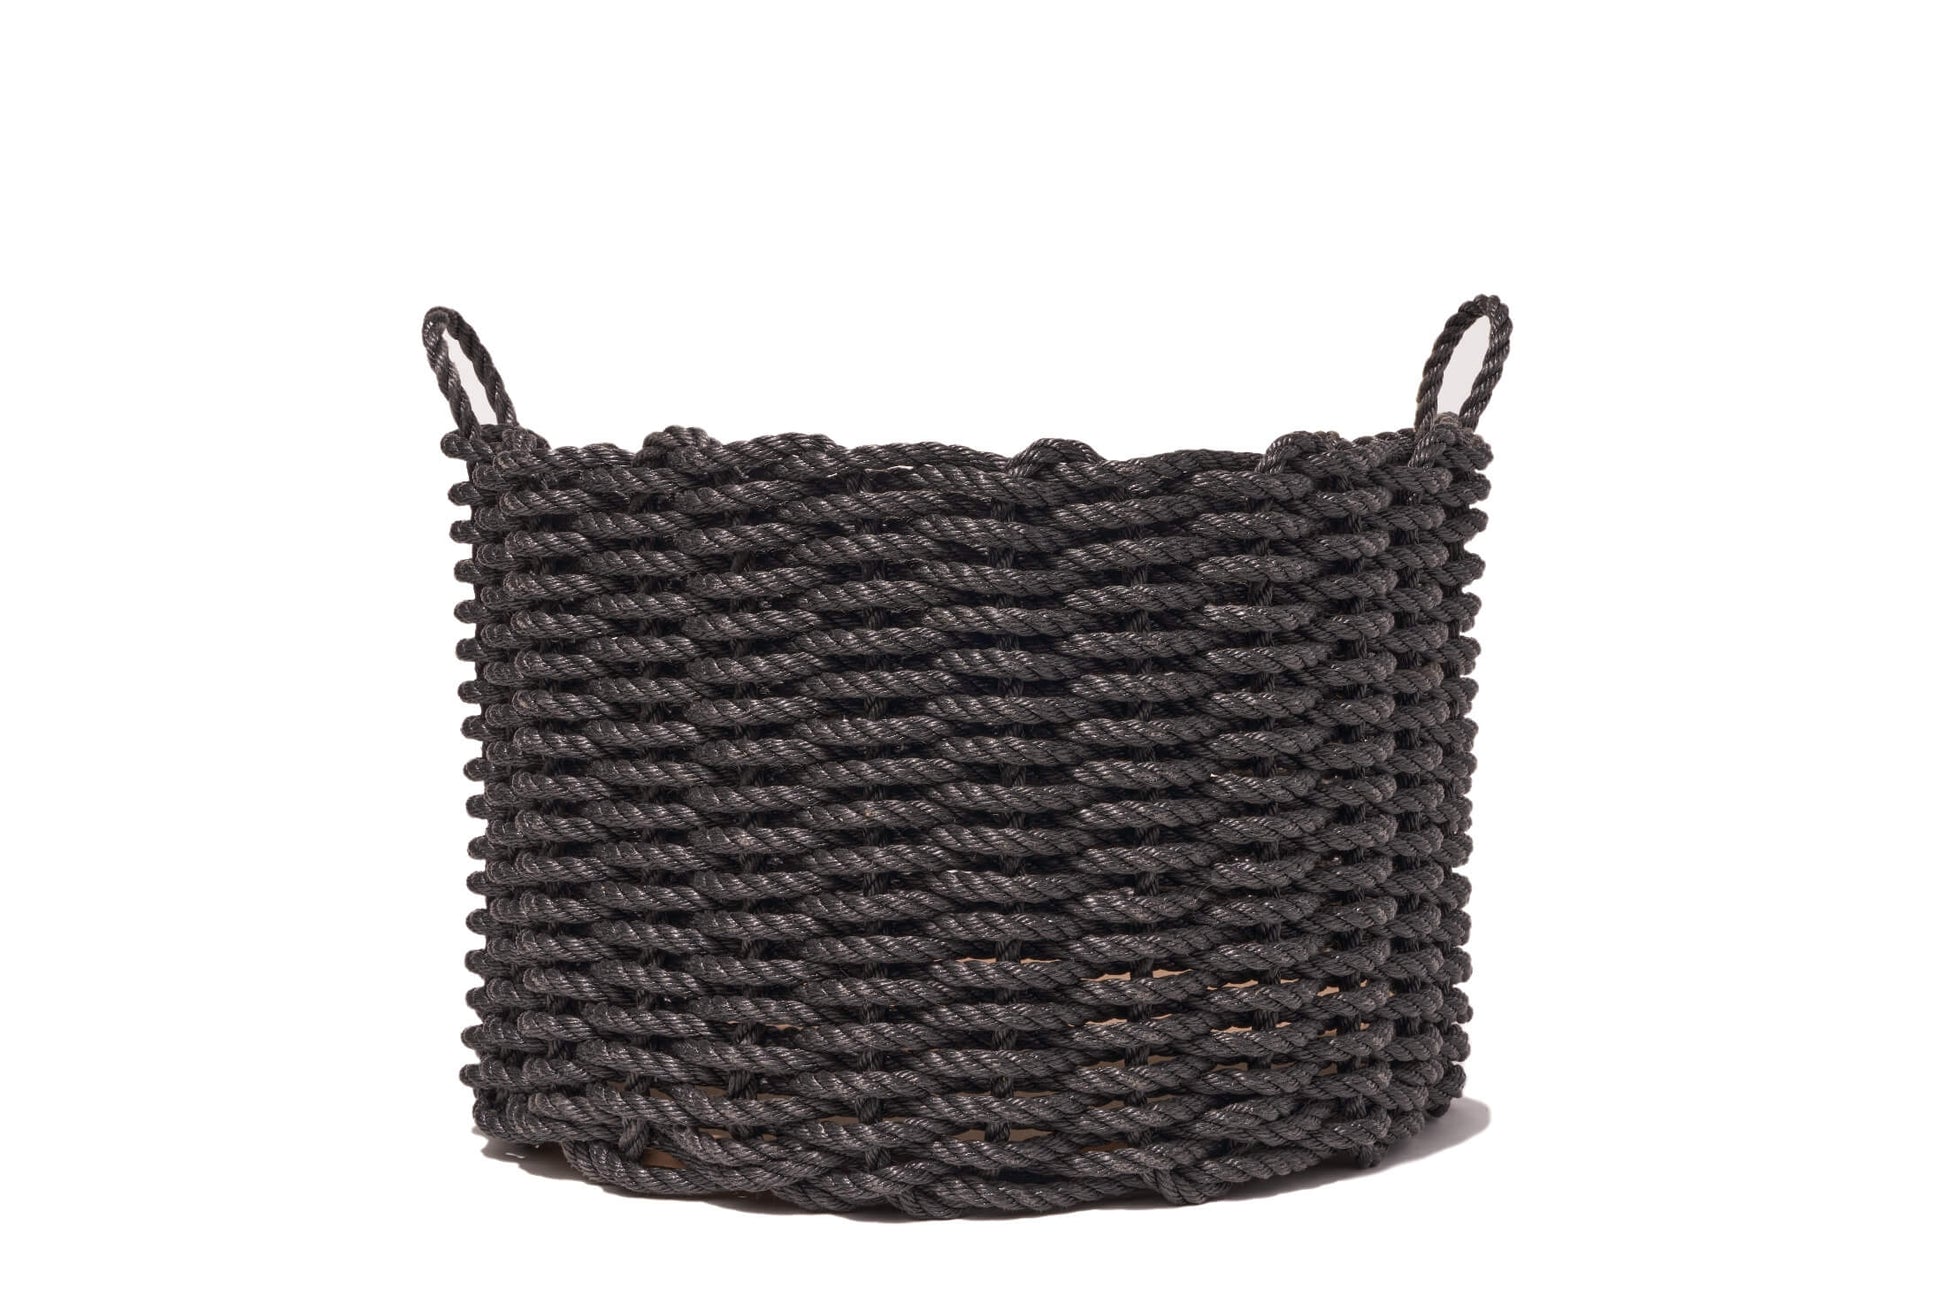 Braided Lobster Rope Basket | Charcoal | The Rope Co